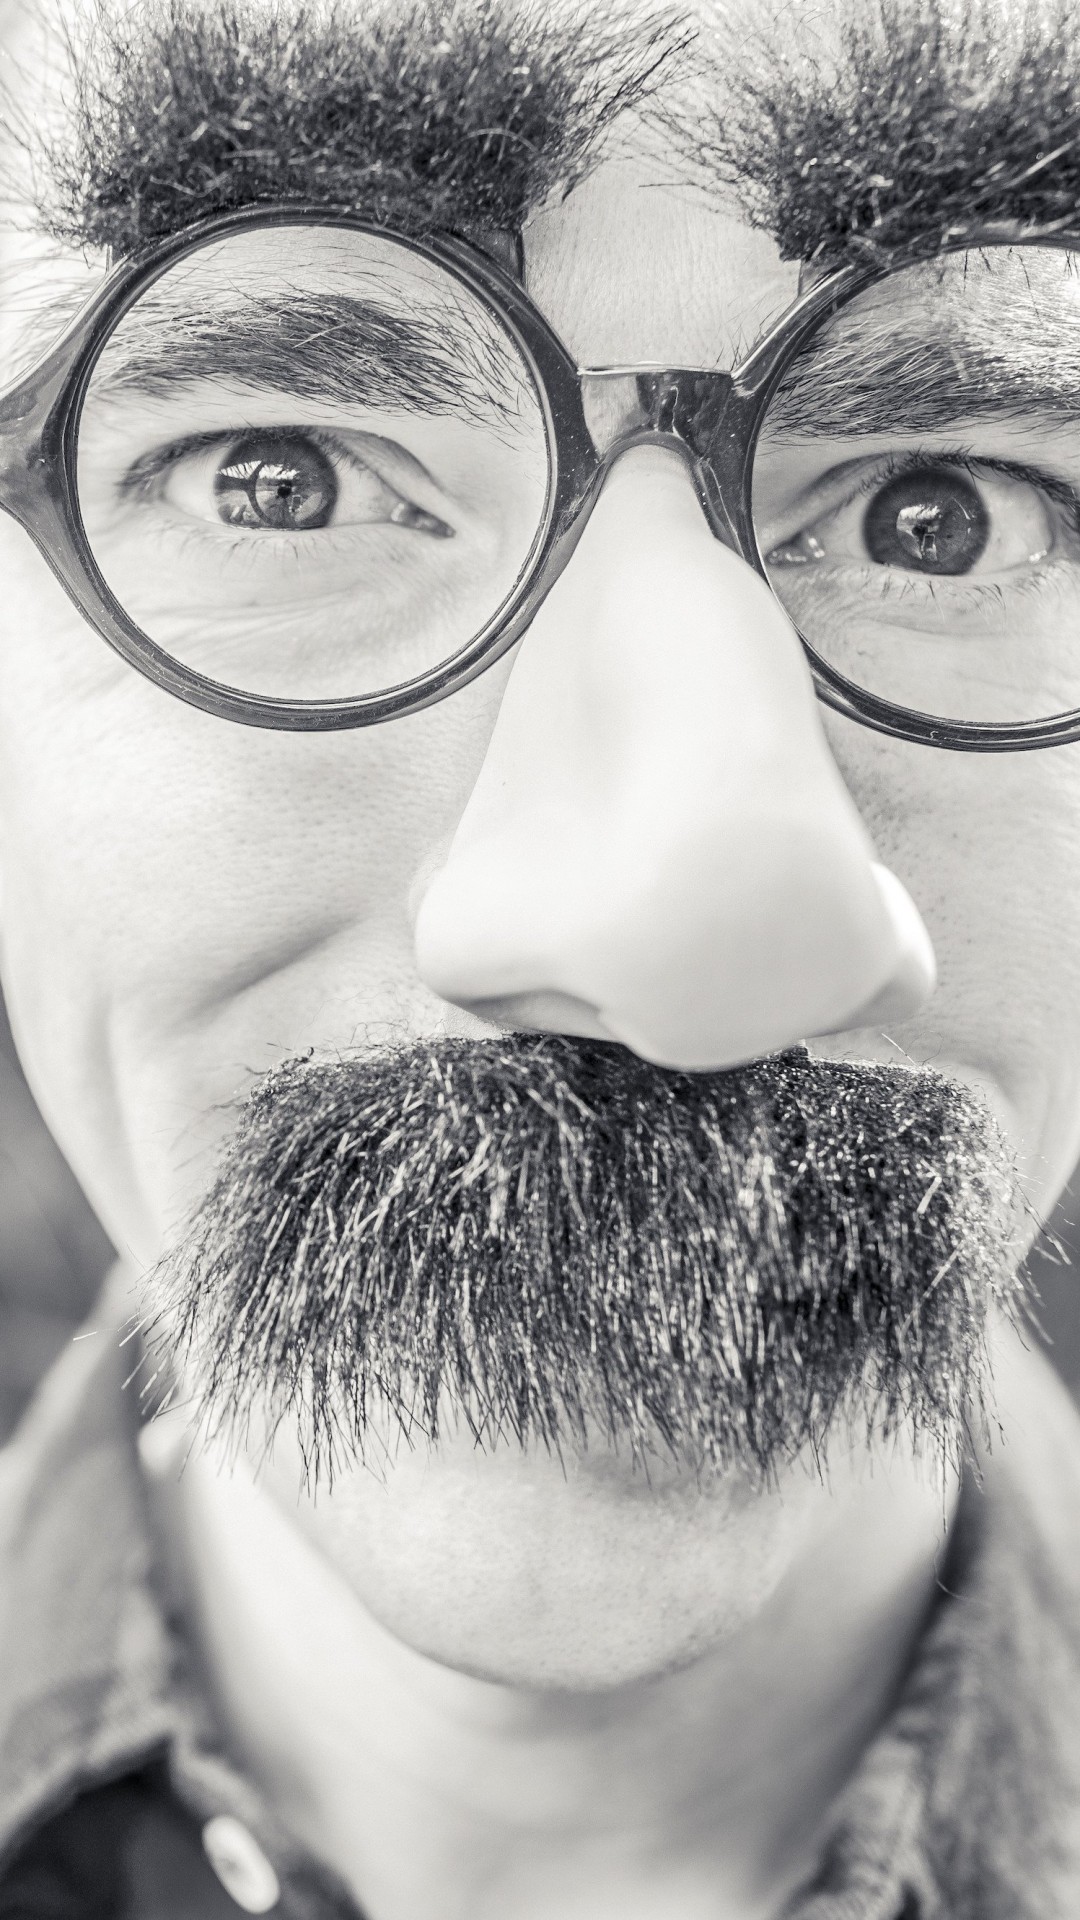 Groucho Glasses Man Wallpaper for SAMSUNG Galaxy S4